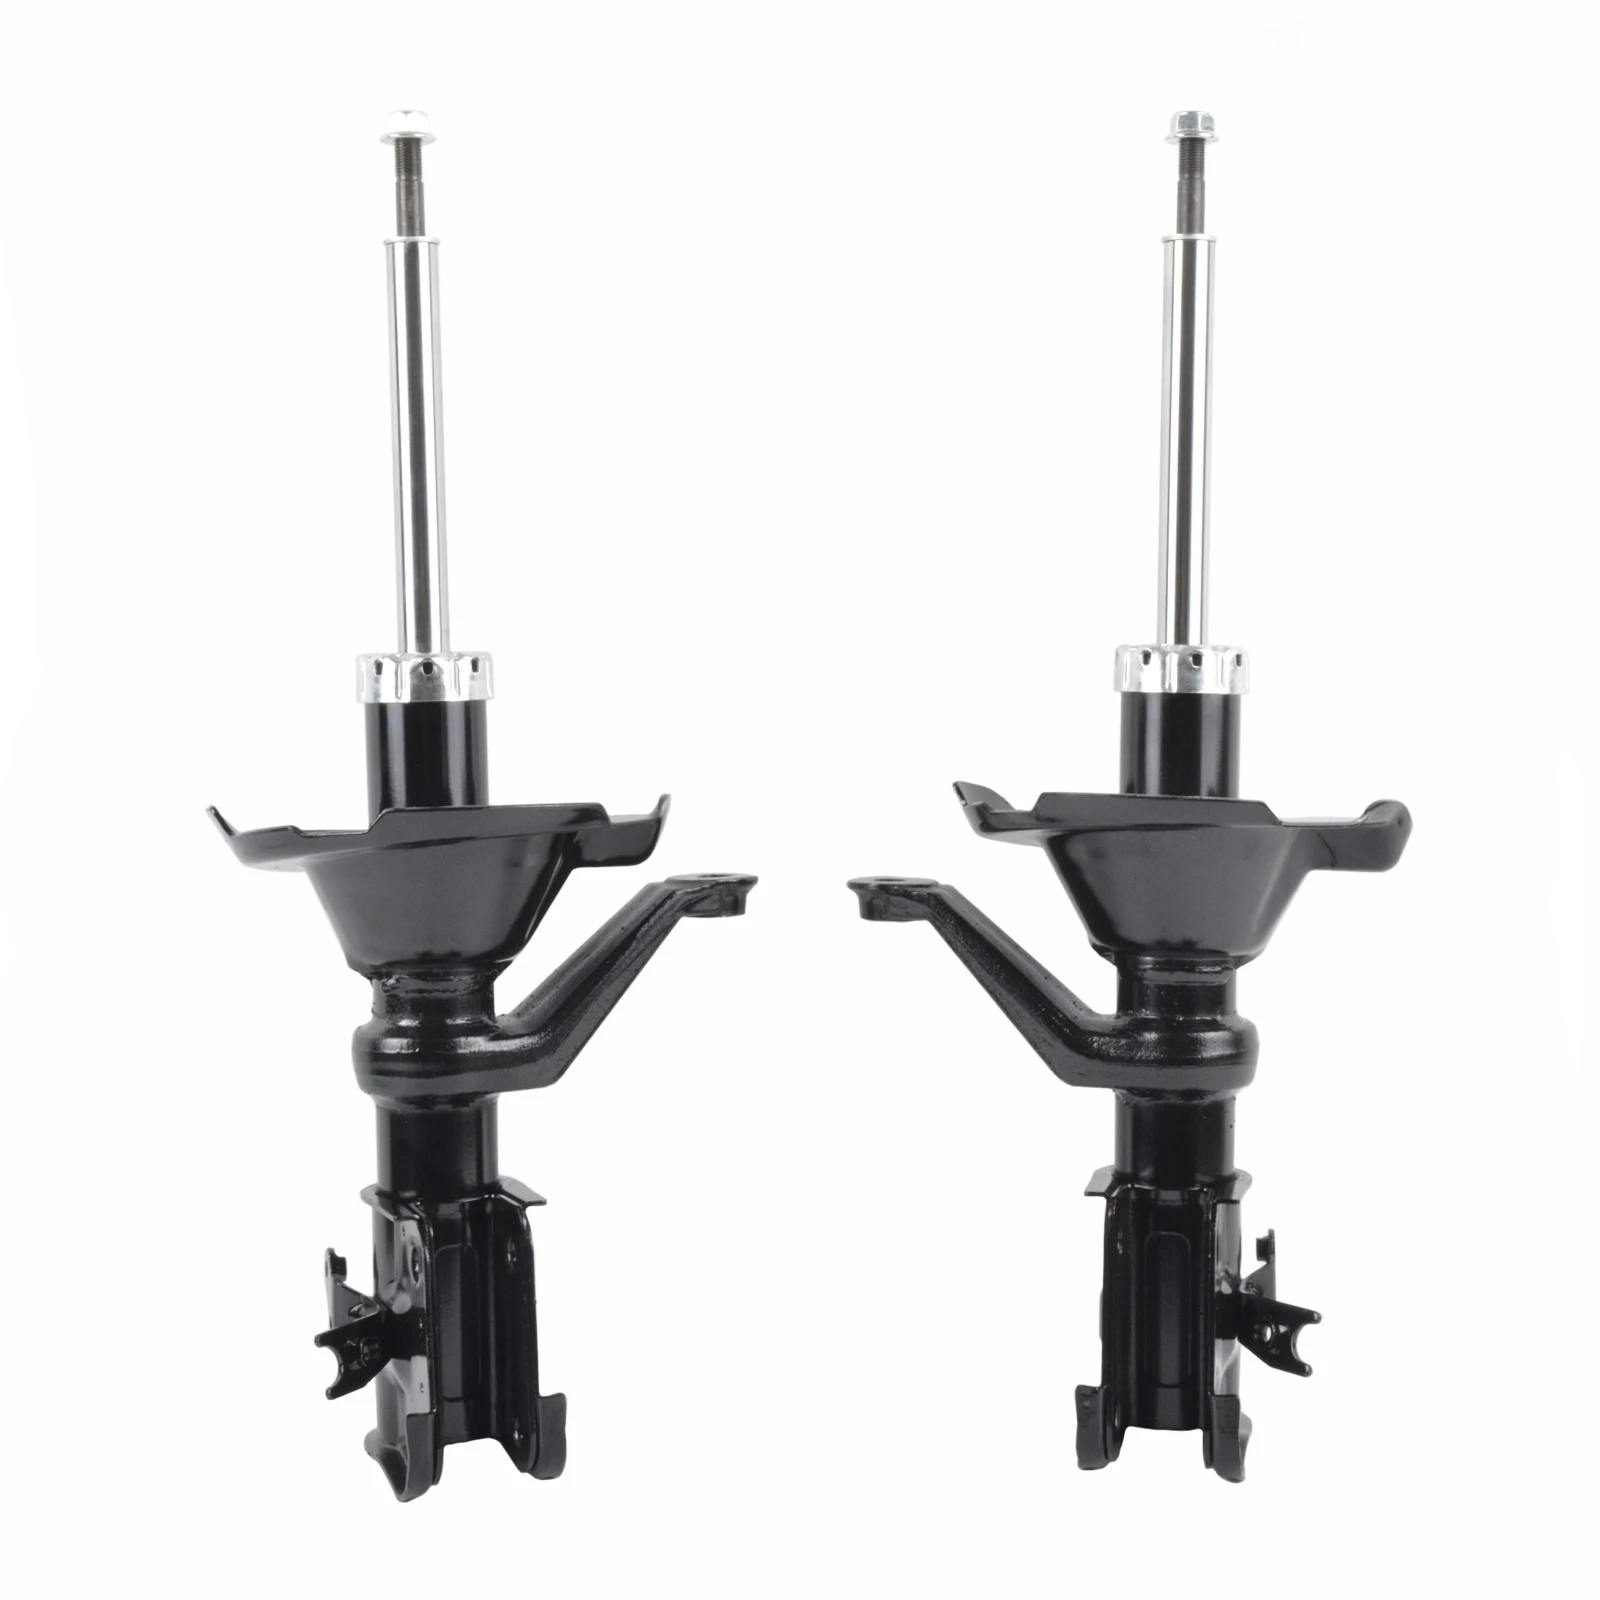 ECCPP Complete Strut Assembly Shock Absorber for 2001 2002 2003 2004 2005 Honda Civic 2pcs Rear Pair 